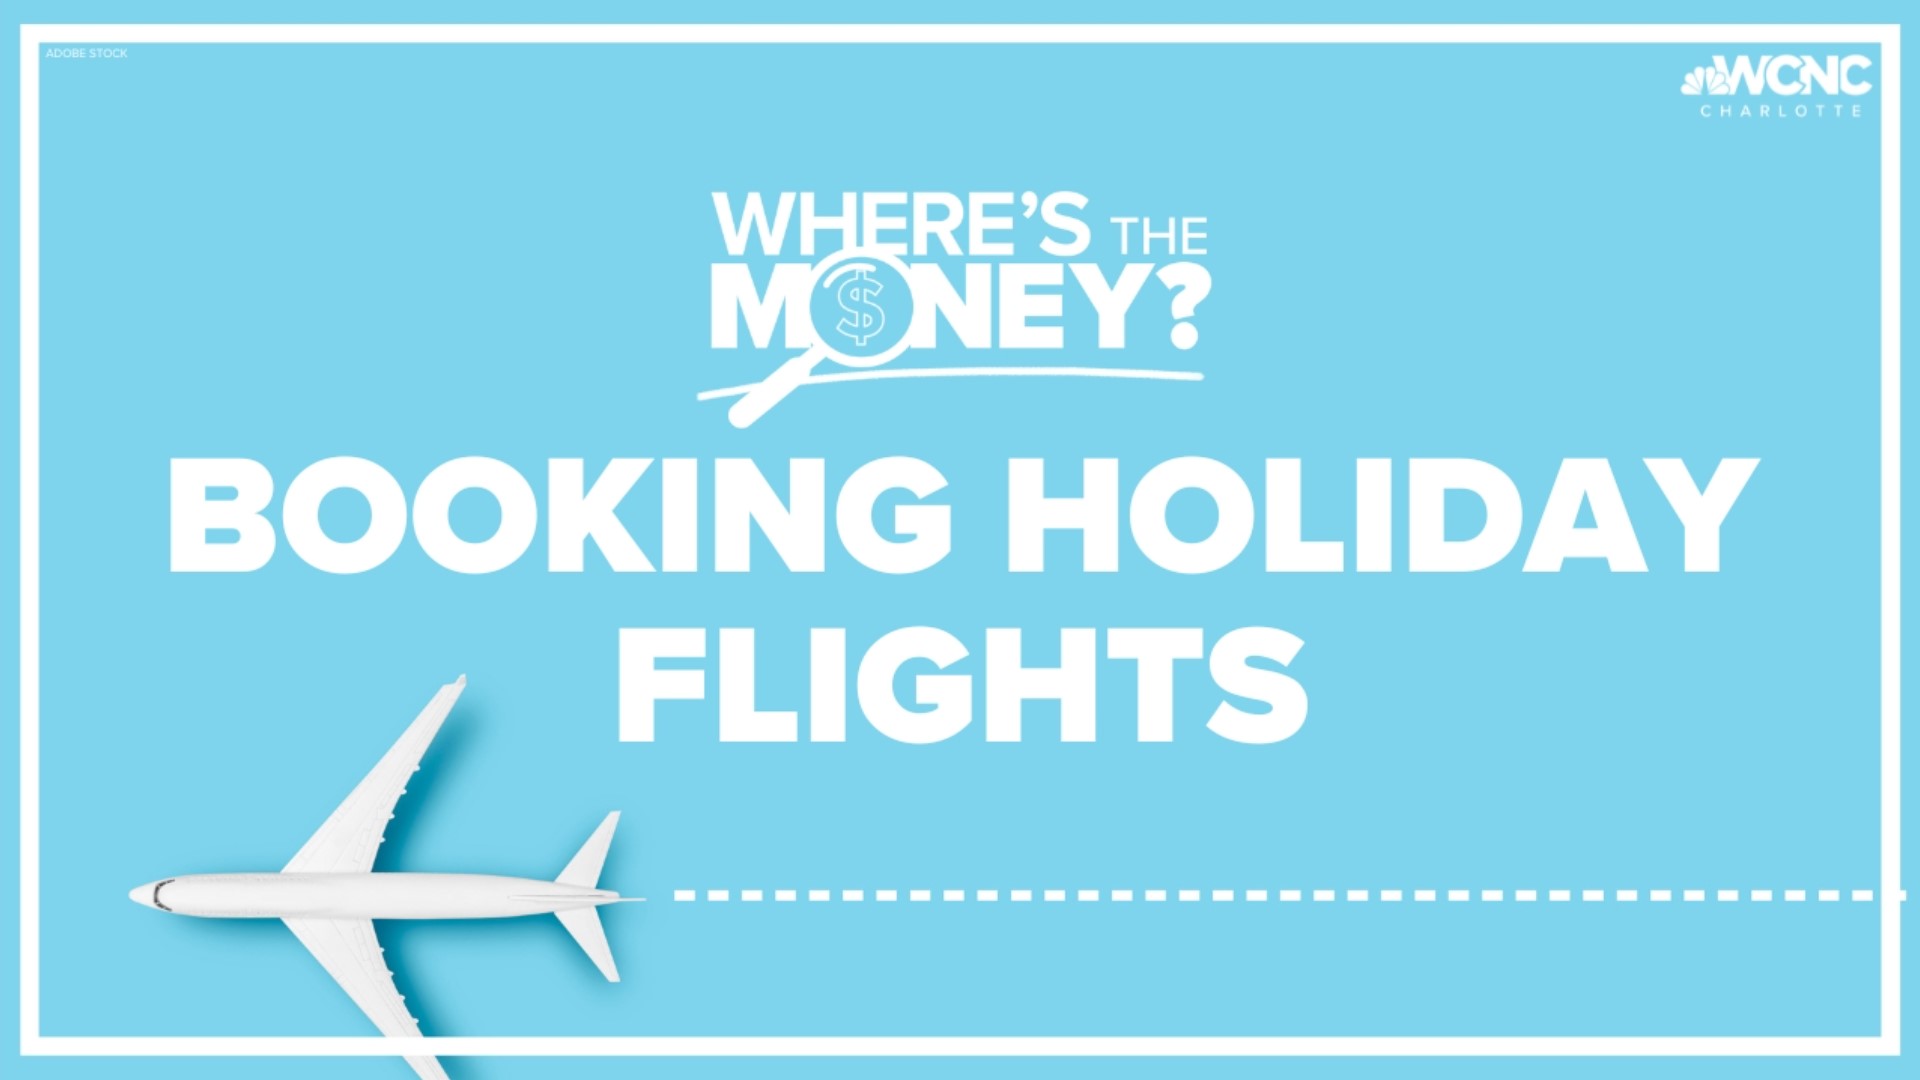 We’re just one month into summer but now’s the time you should start booking flights to go home for the winter holidays.